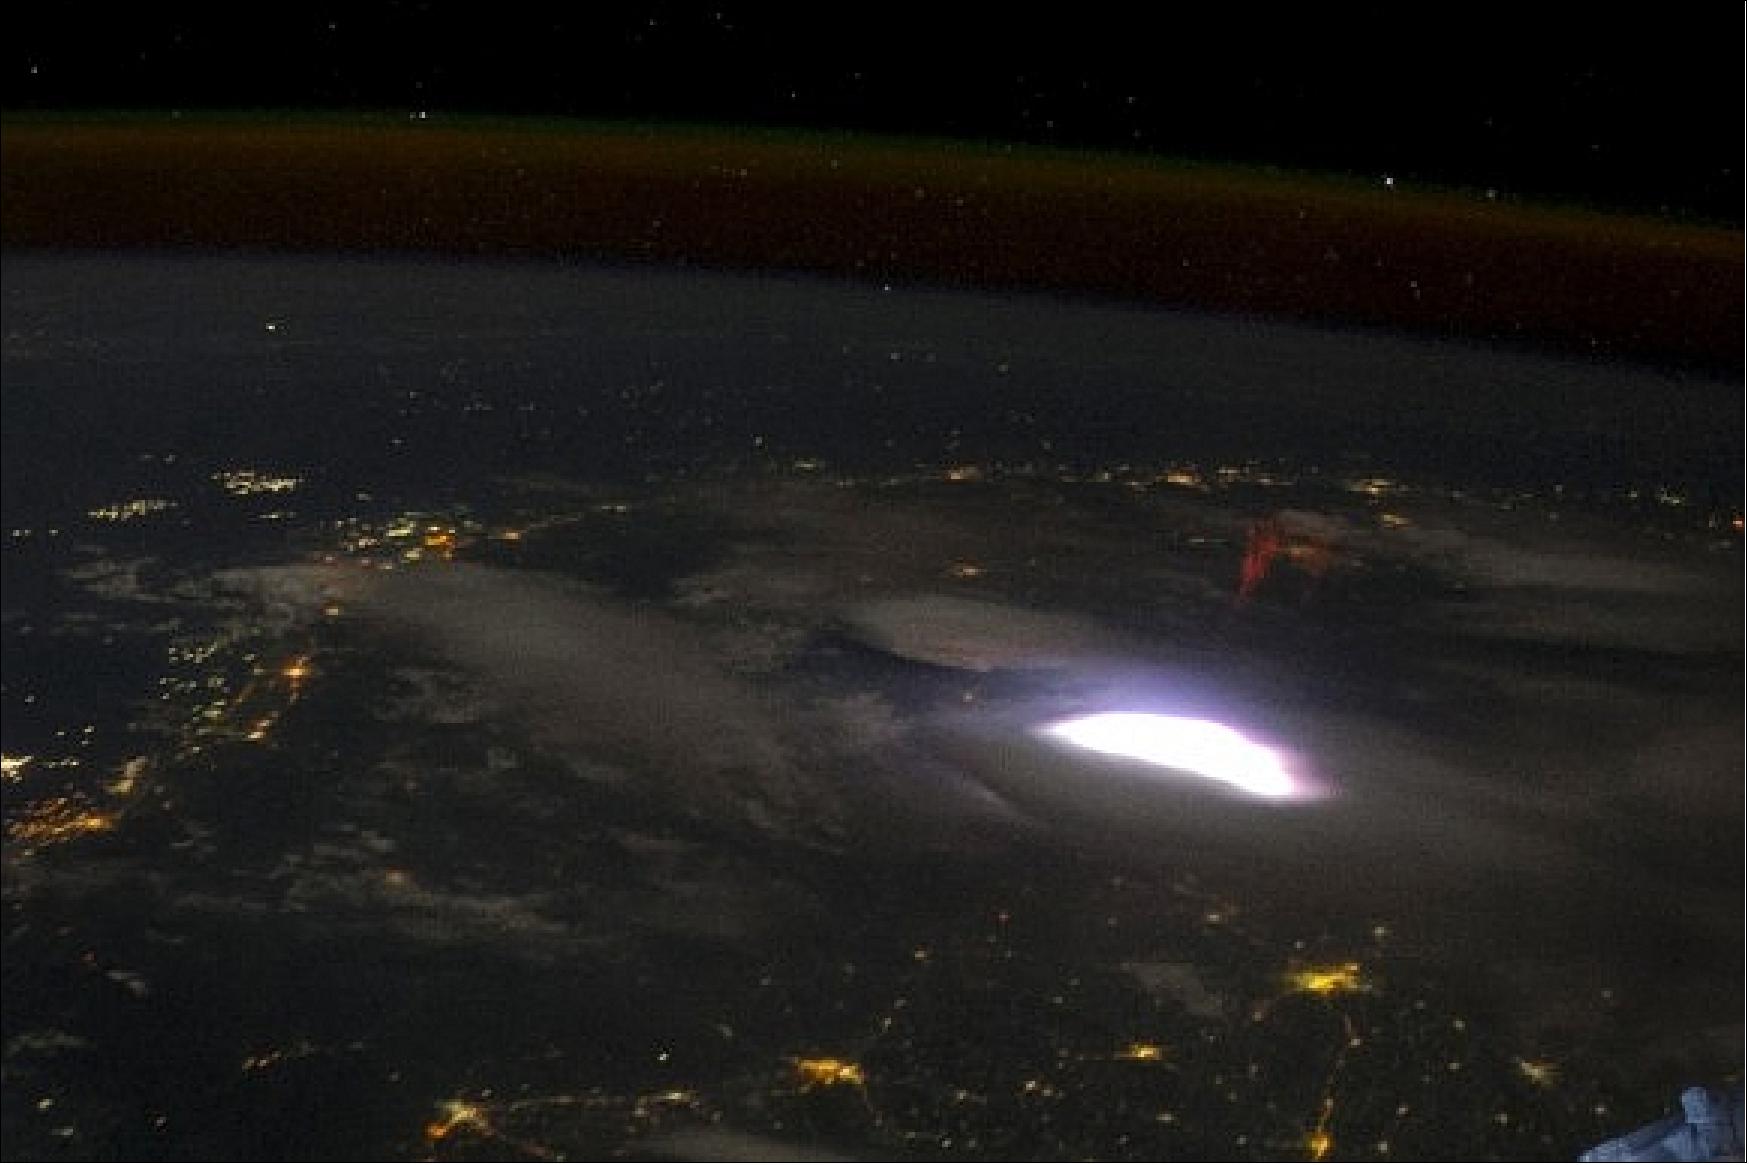 Figure 2: A bright red sprite appears above a lightning flash in a photo captured from the ISS (image credit: NASA, Universe Today)